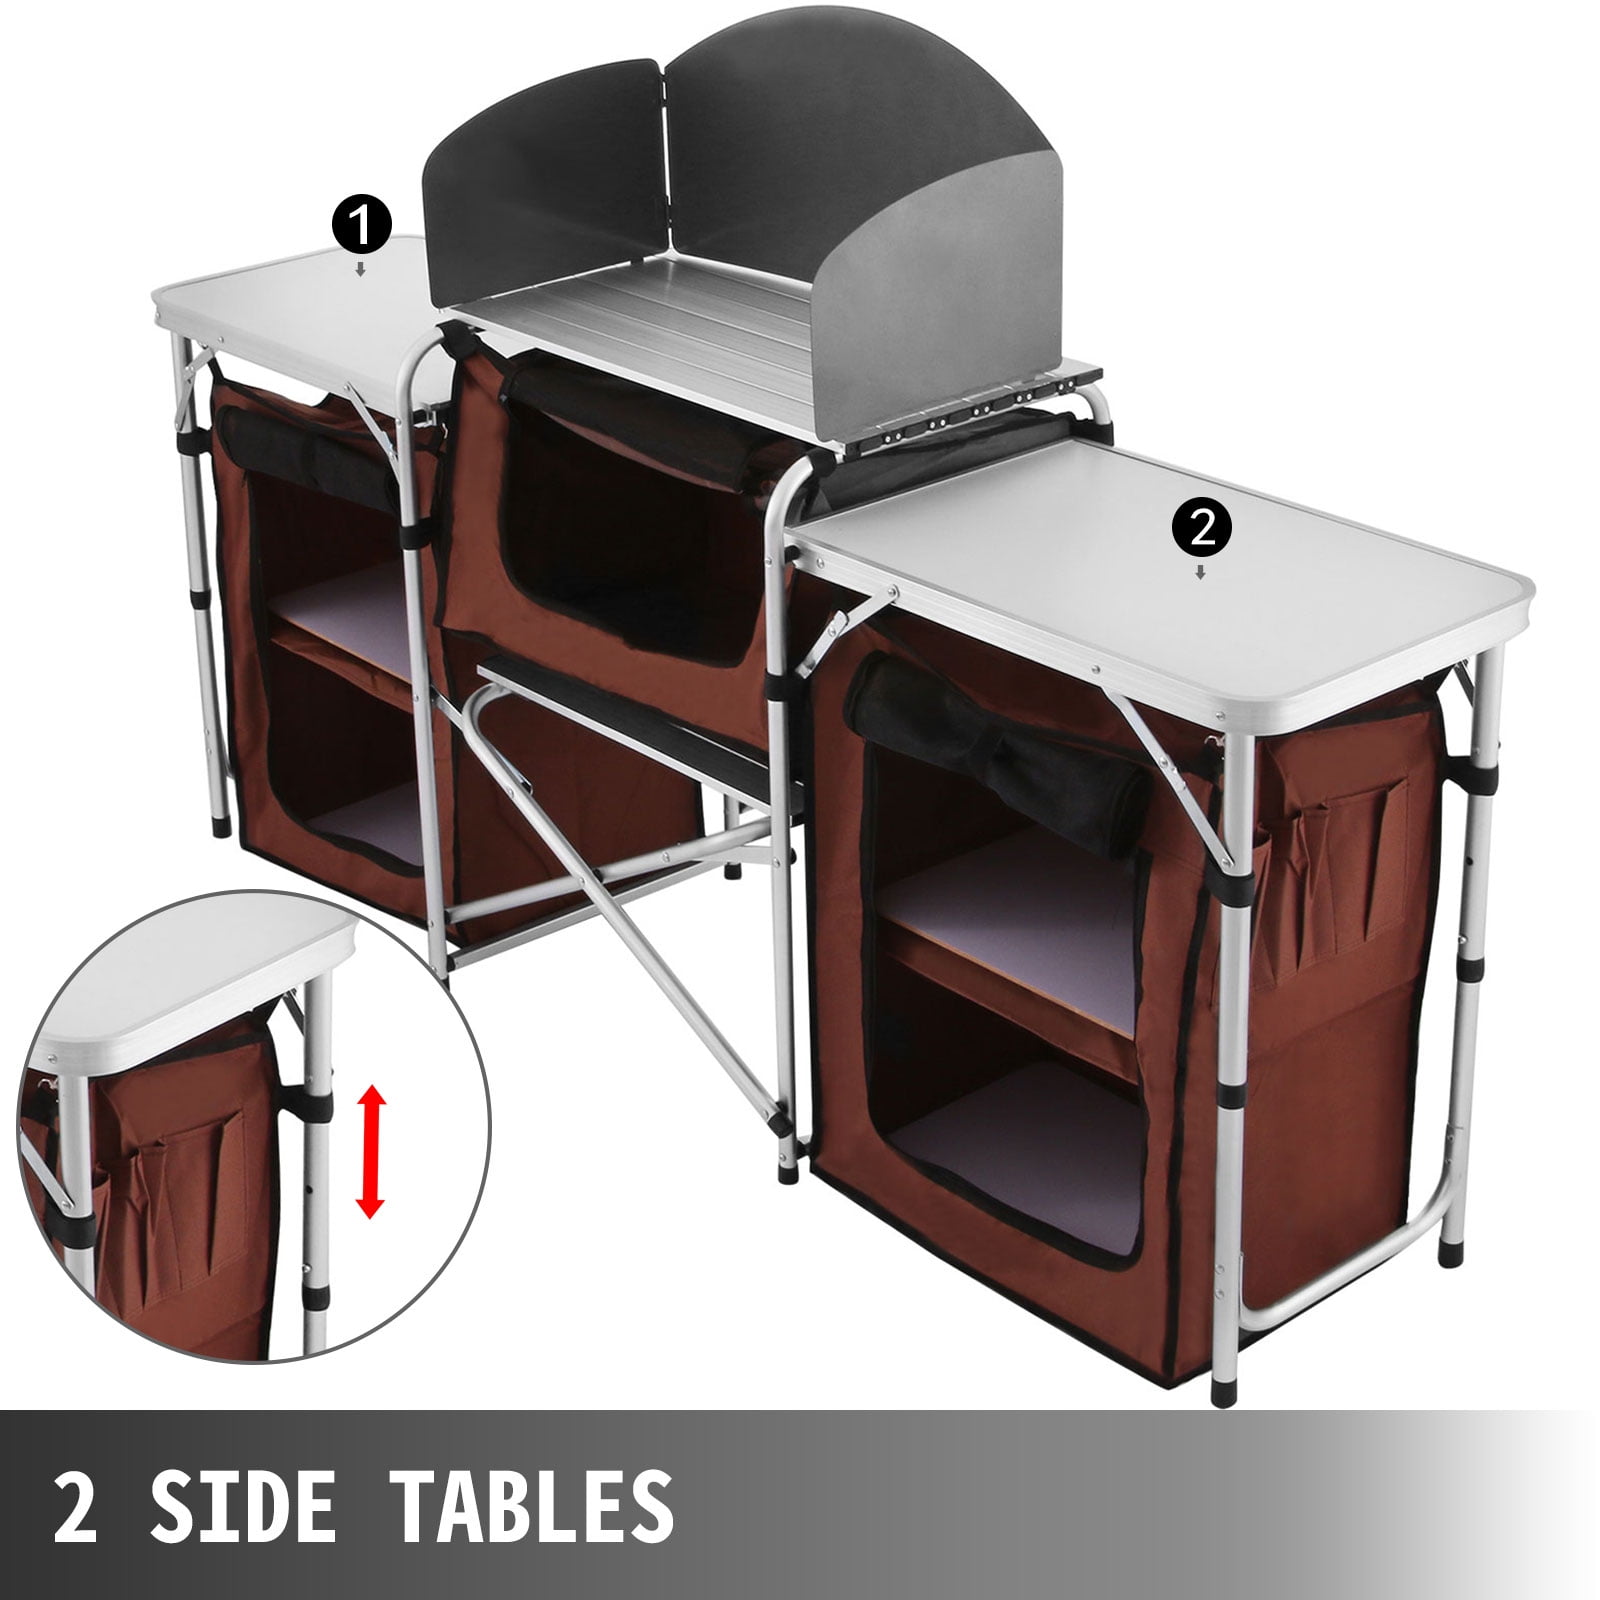 Details about   Portable Windscreen and Storage Organiser Camping Kitchen Table Outdoor Use NEW 